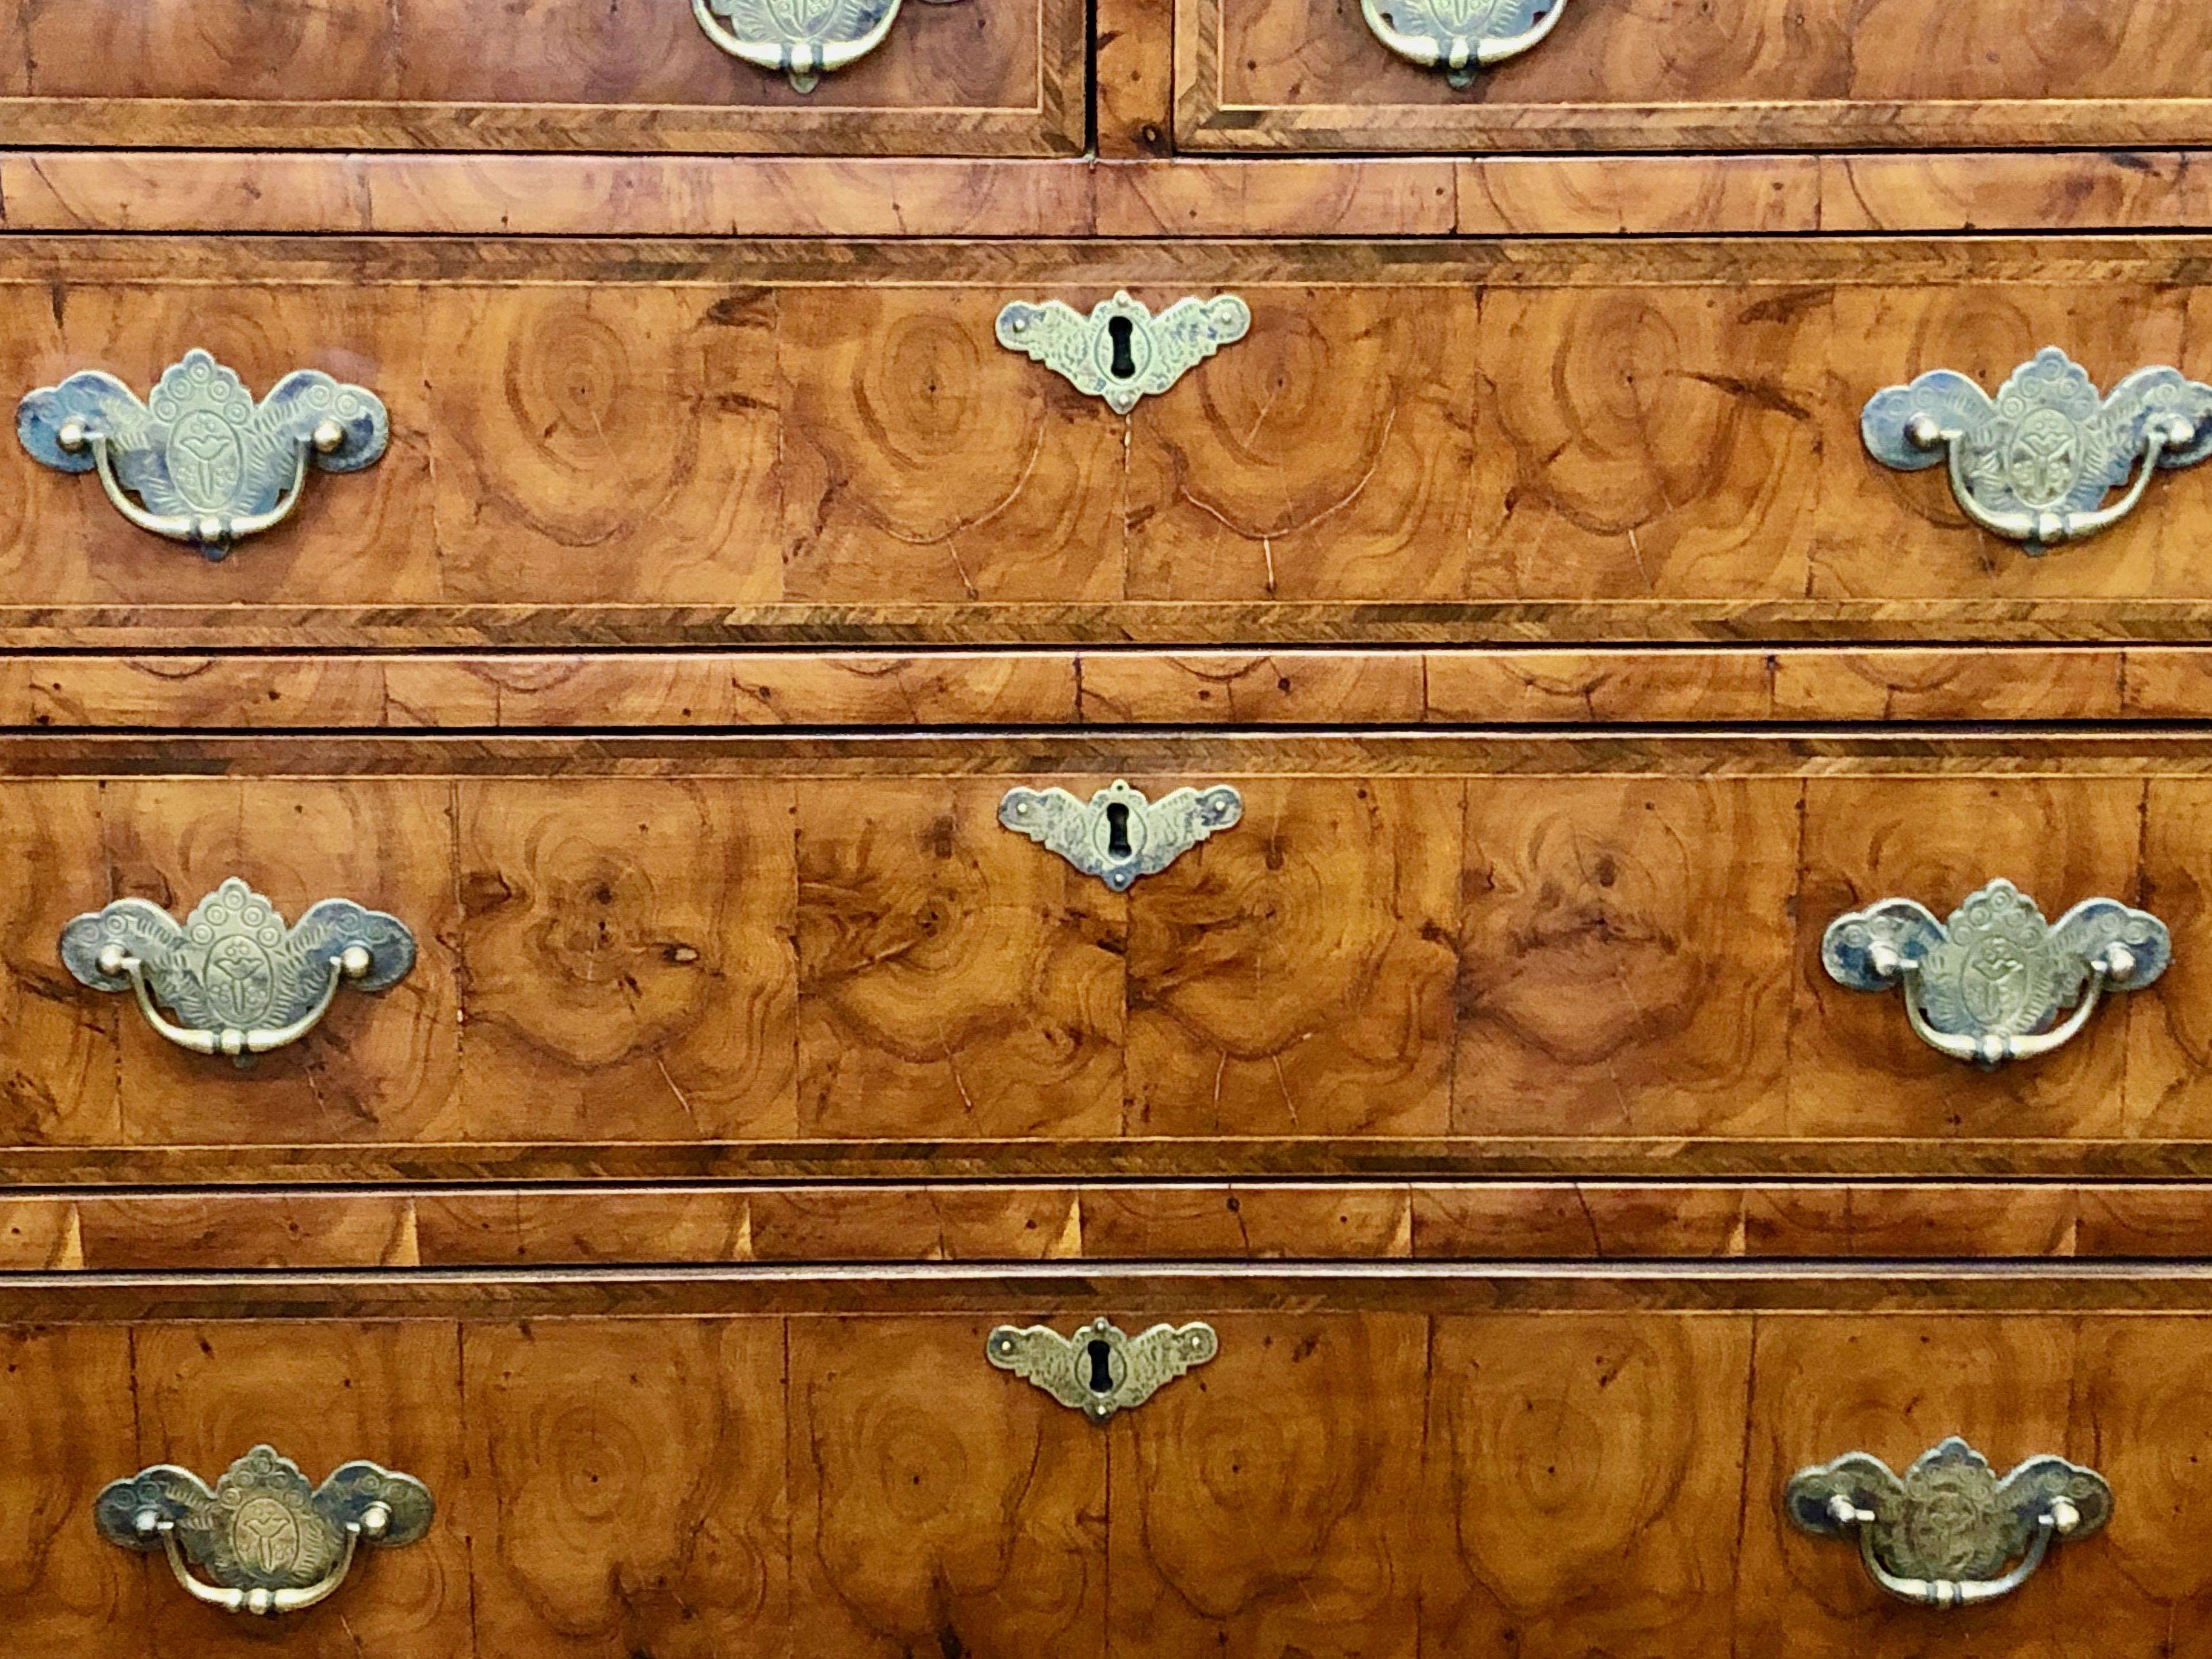 Fabulous quality antique English inlaid yew-wood oyster veneer Chippendale Revival chest of drawers

Please note exceptional yew-wood 